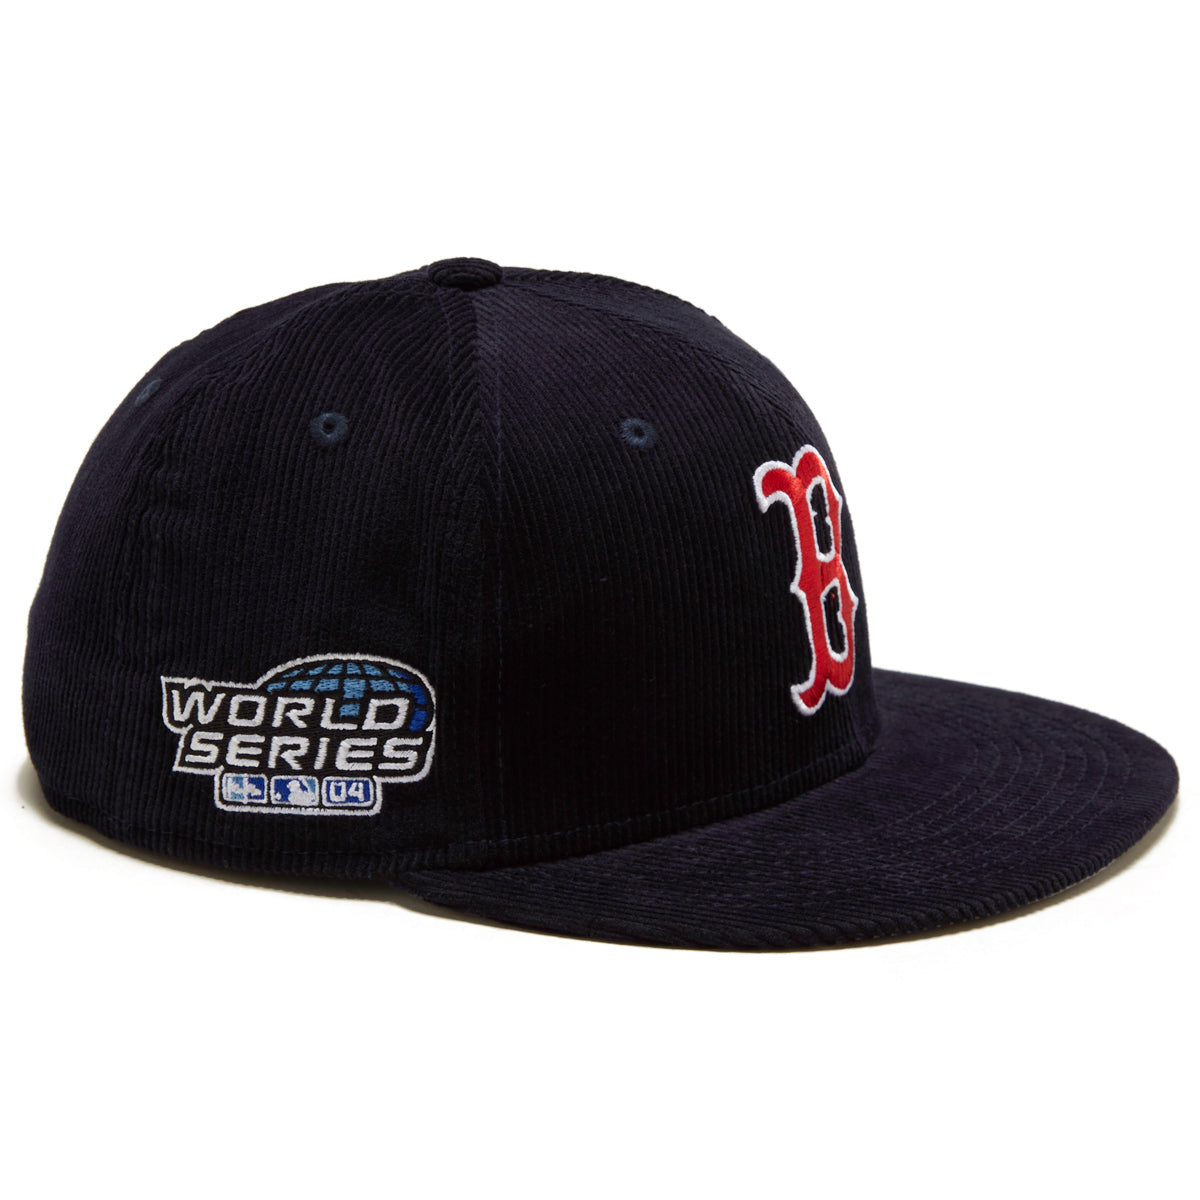 New Era Throwback Cord 17208 Boston Red Sox Hat - Navy/Red image 3